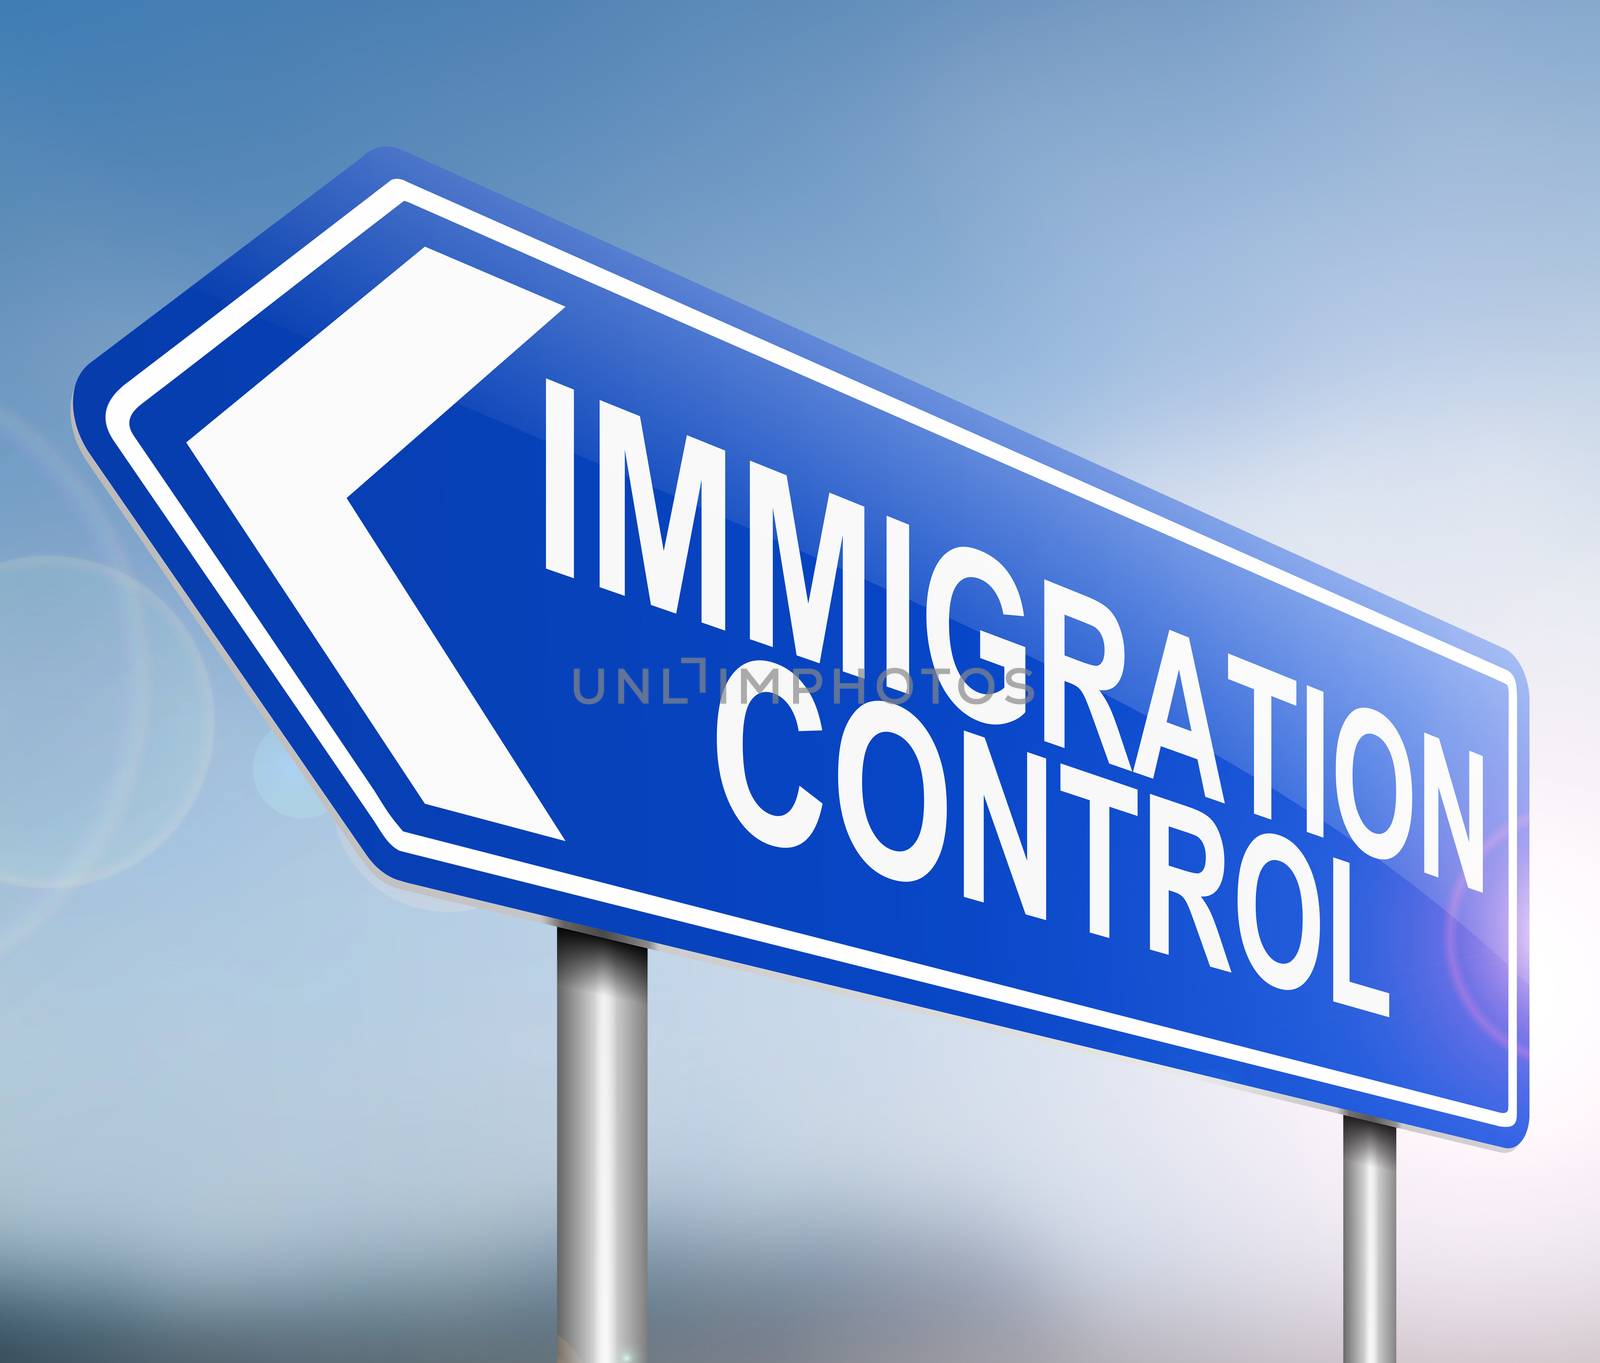 Immigration control concept. by 72soul